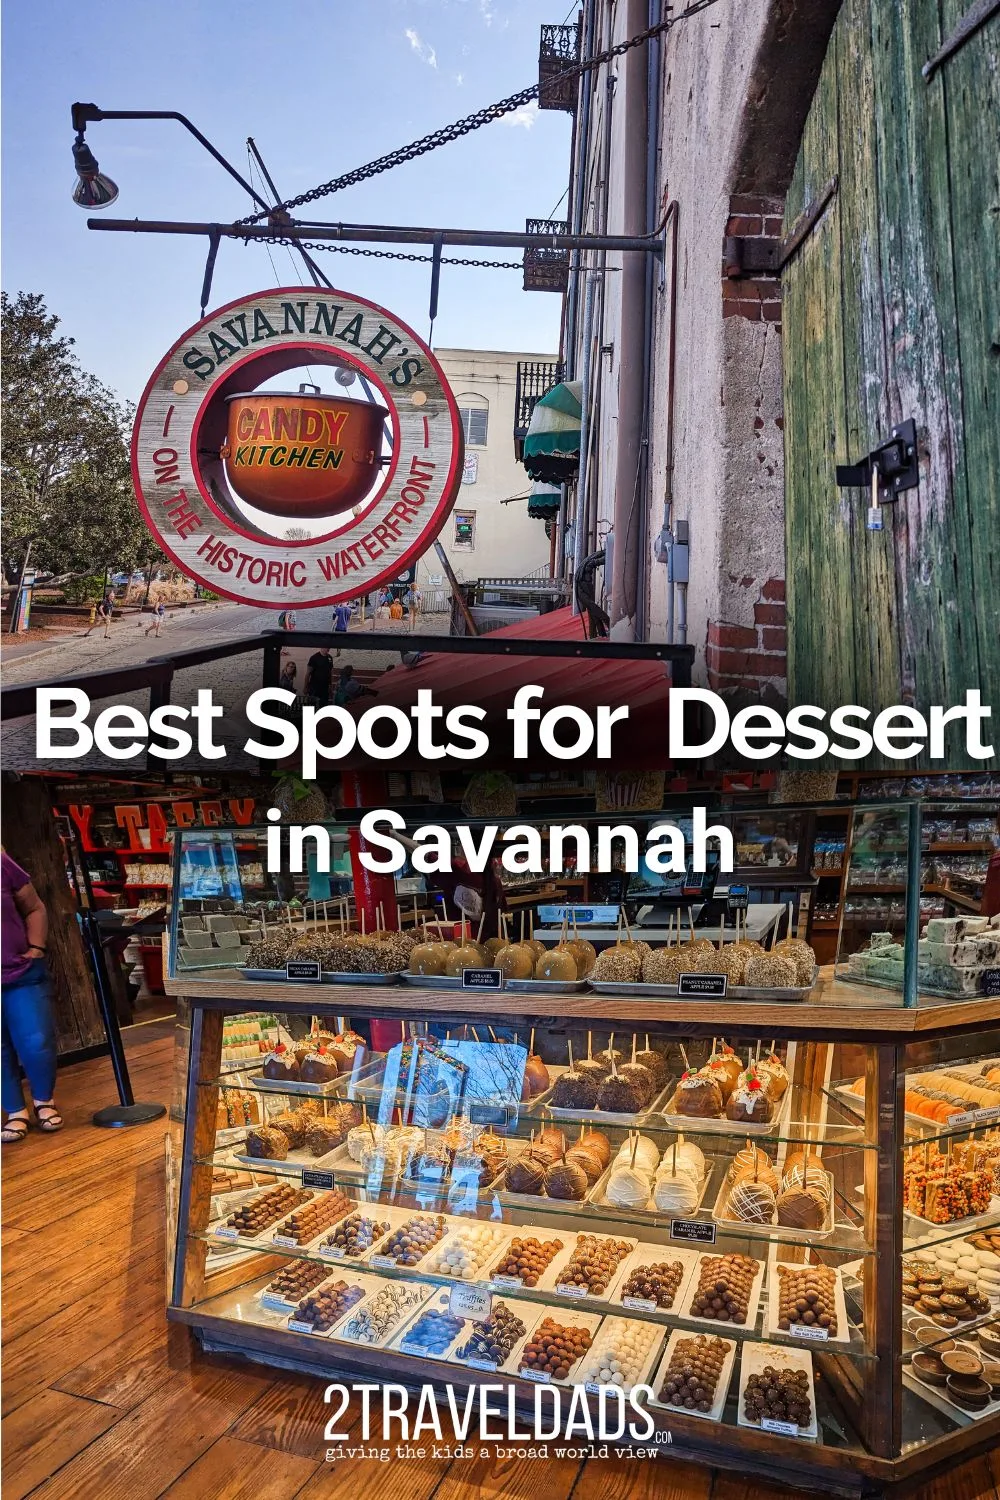 We've eaten a lot of treats and come up with our favorite desserts in Savannah. From ice cream to chocolate parlors, we've got the must-try dessert spots around Savannah.